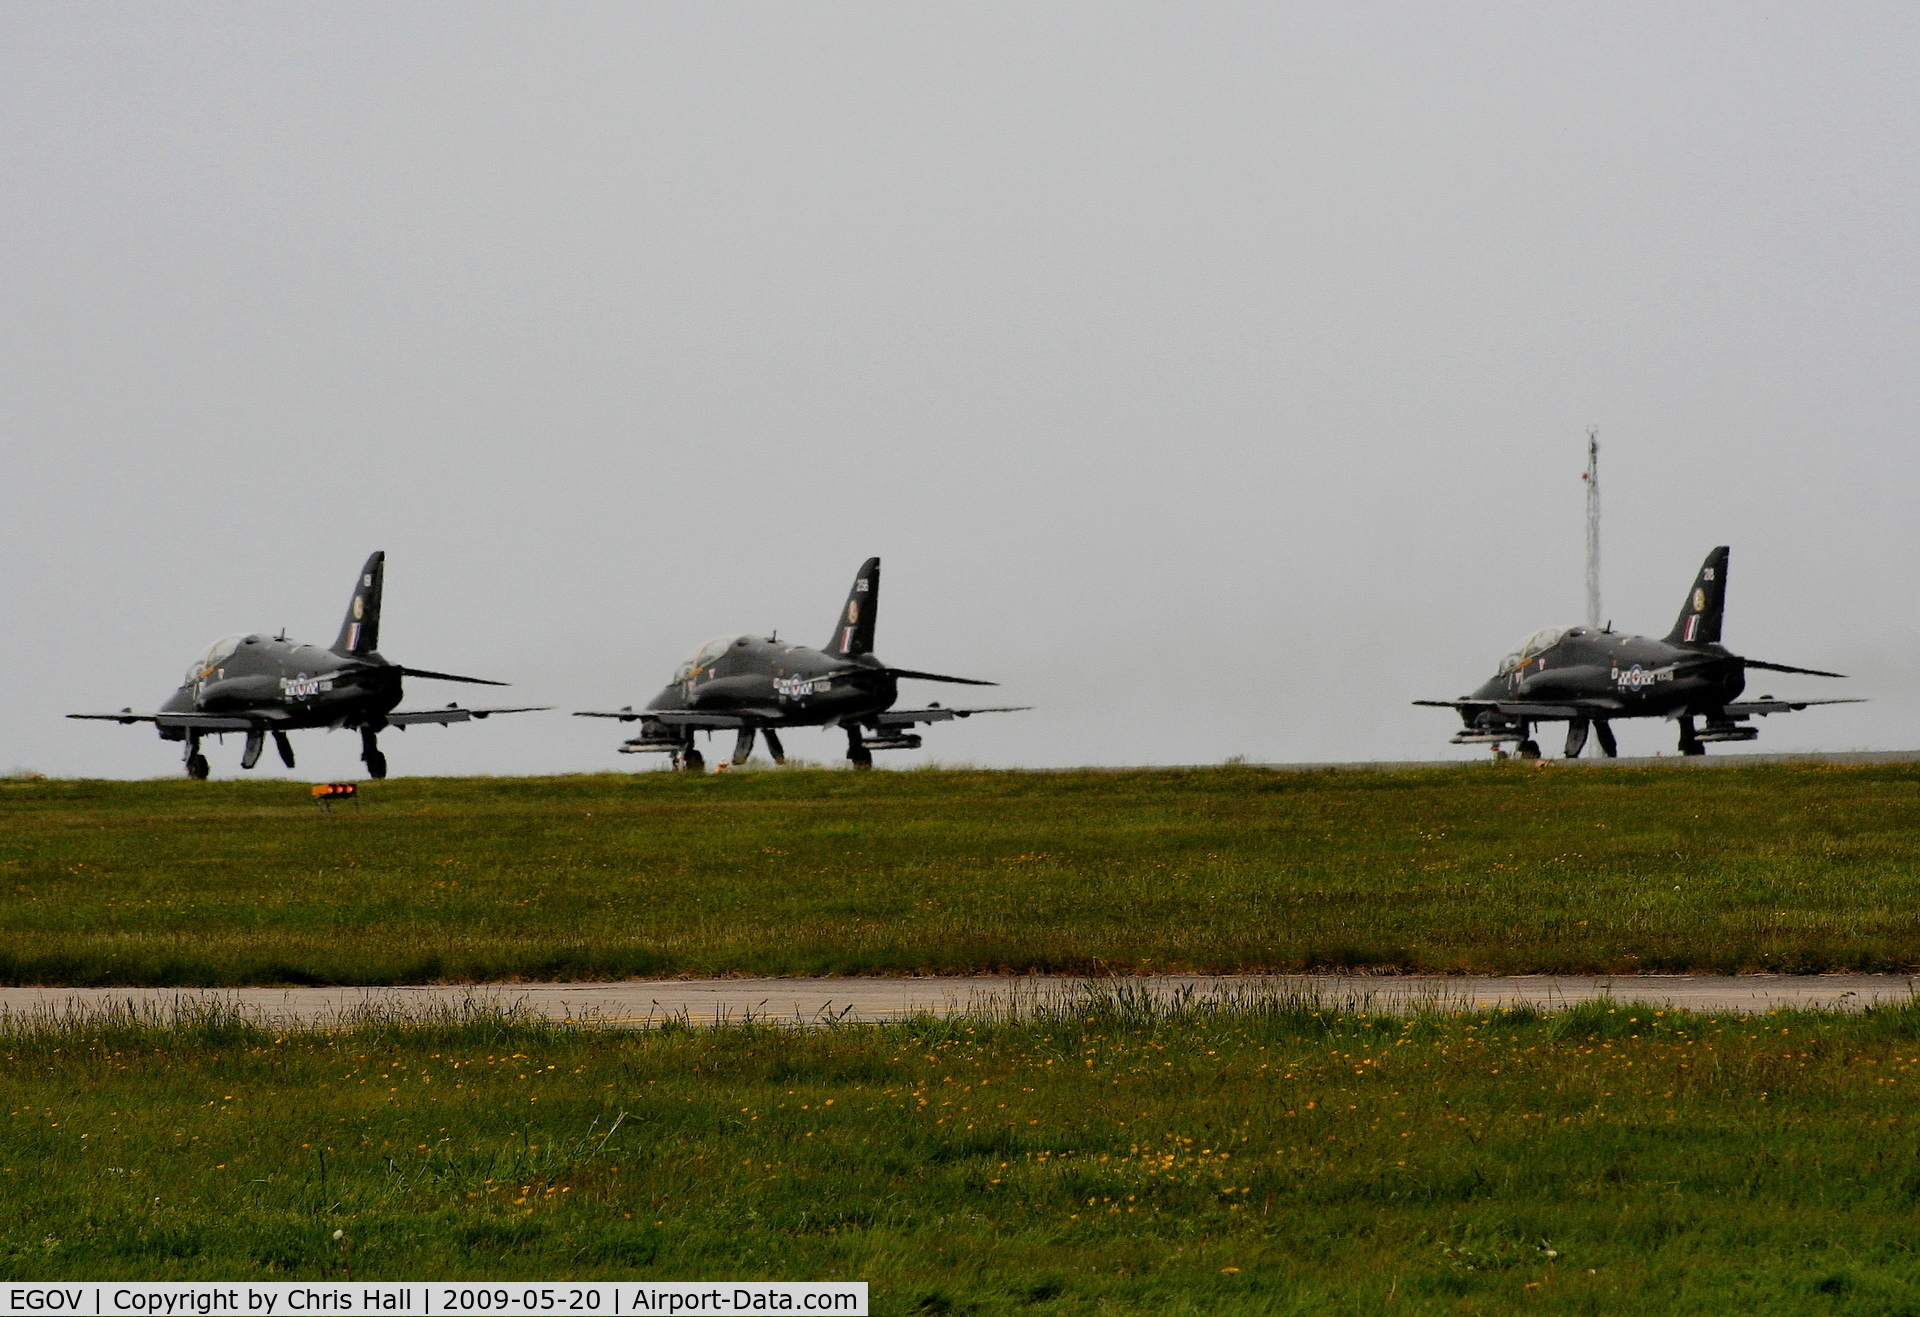 Anglesey Airport (Maes Awyr Môn) or RAF Valley, Anglesey United Kingdom (EGOV) - Three Hawk's on the runway at RAF Valley